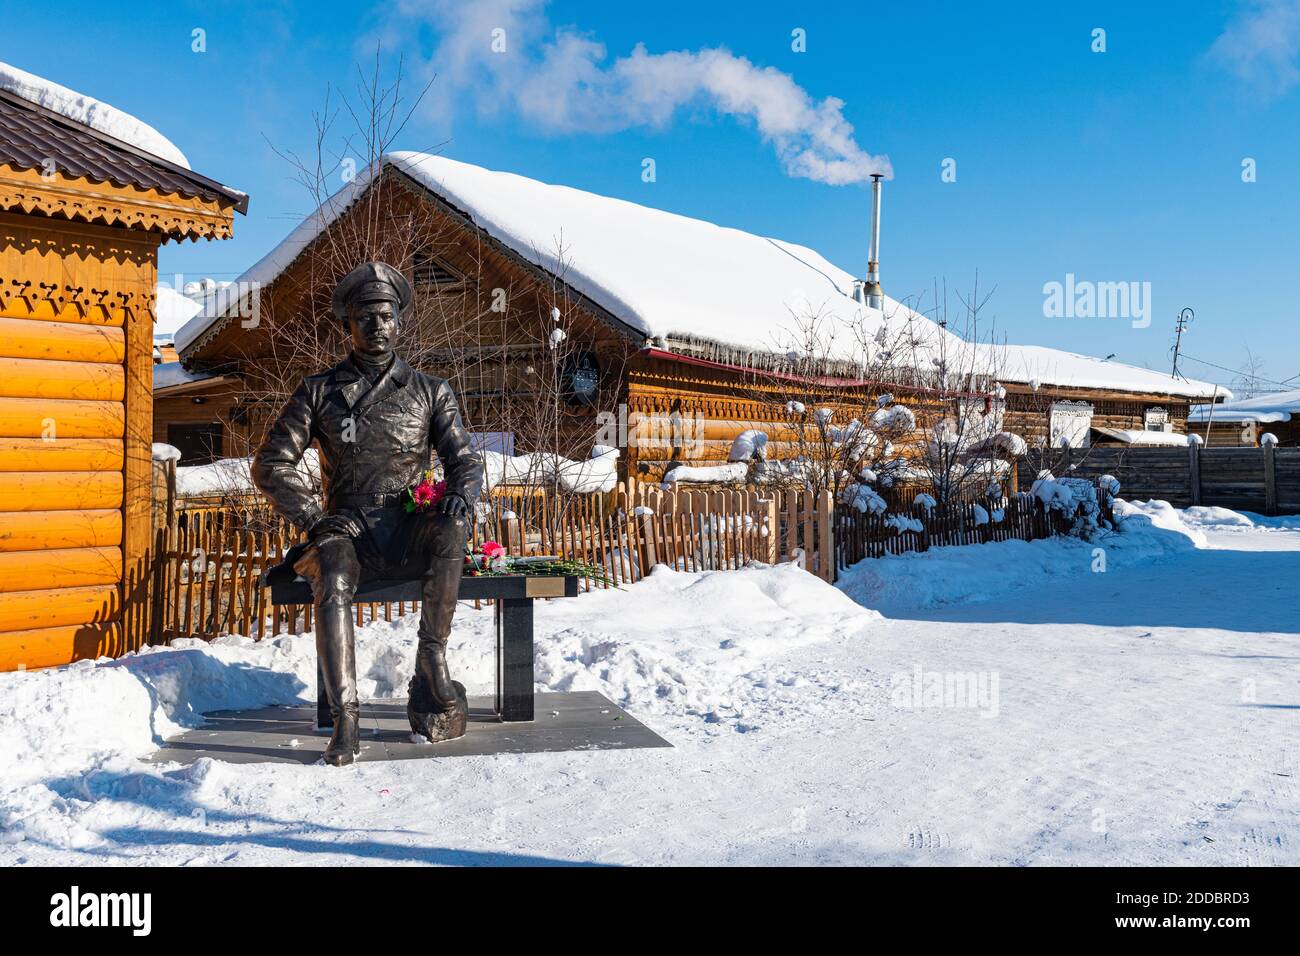 Russia, Republic of Sakha, Yakutsk, Statue of soldier sitting on bench in front of rustic houses in winter Stock Photo